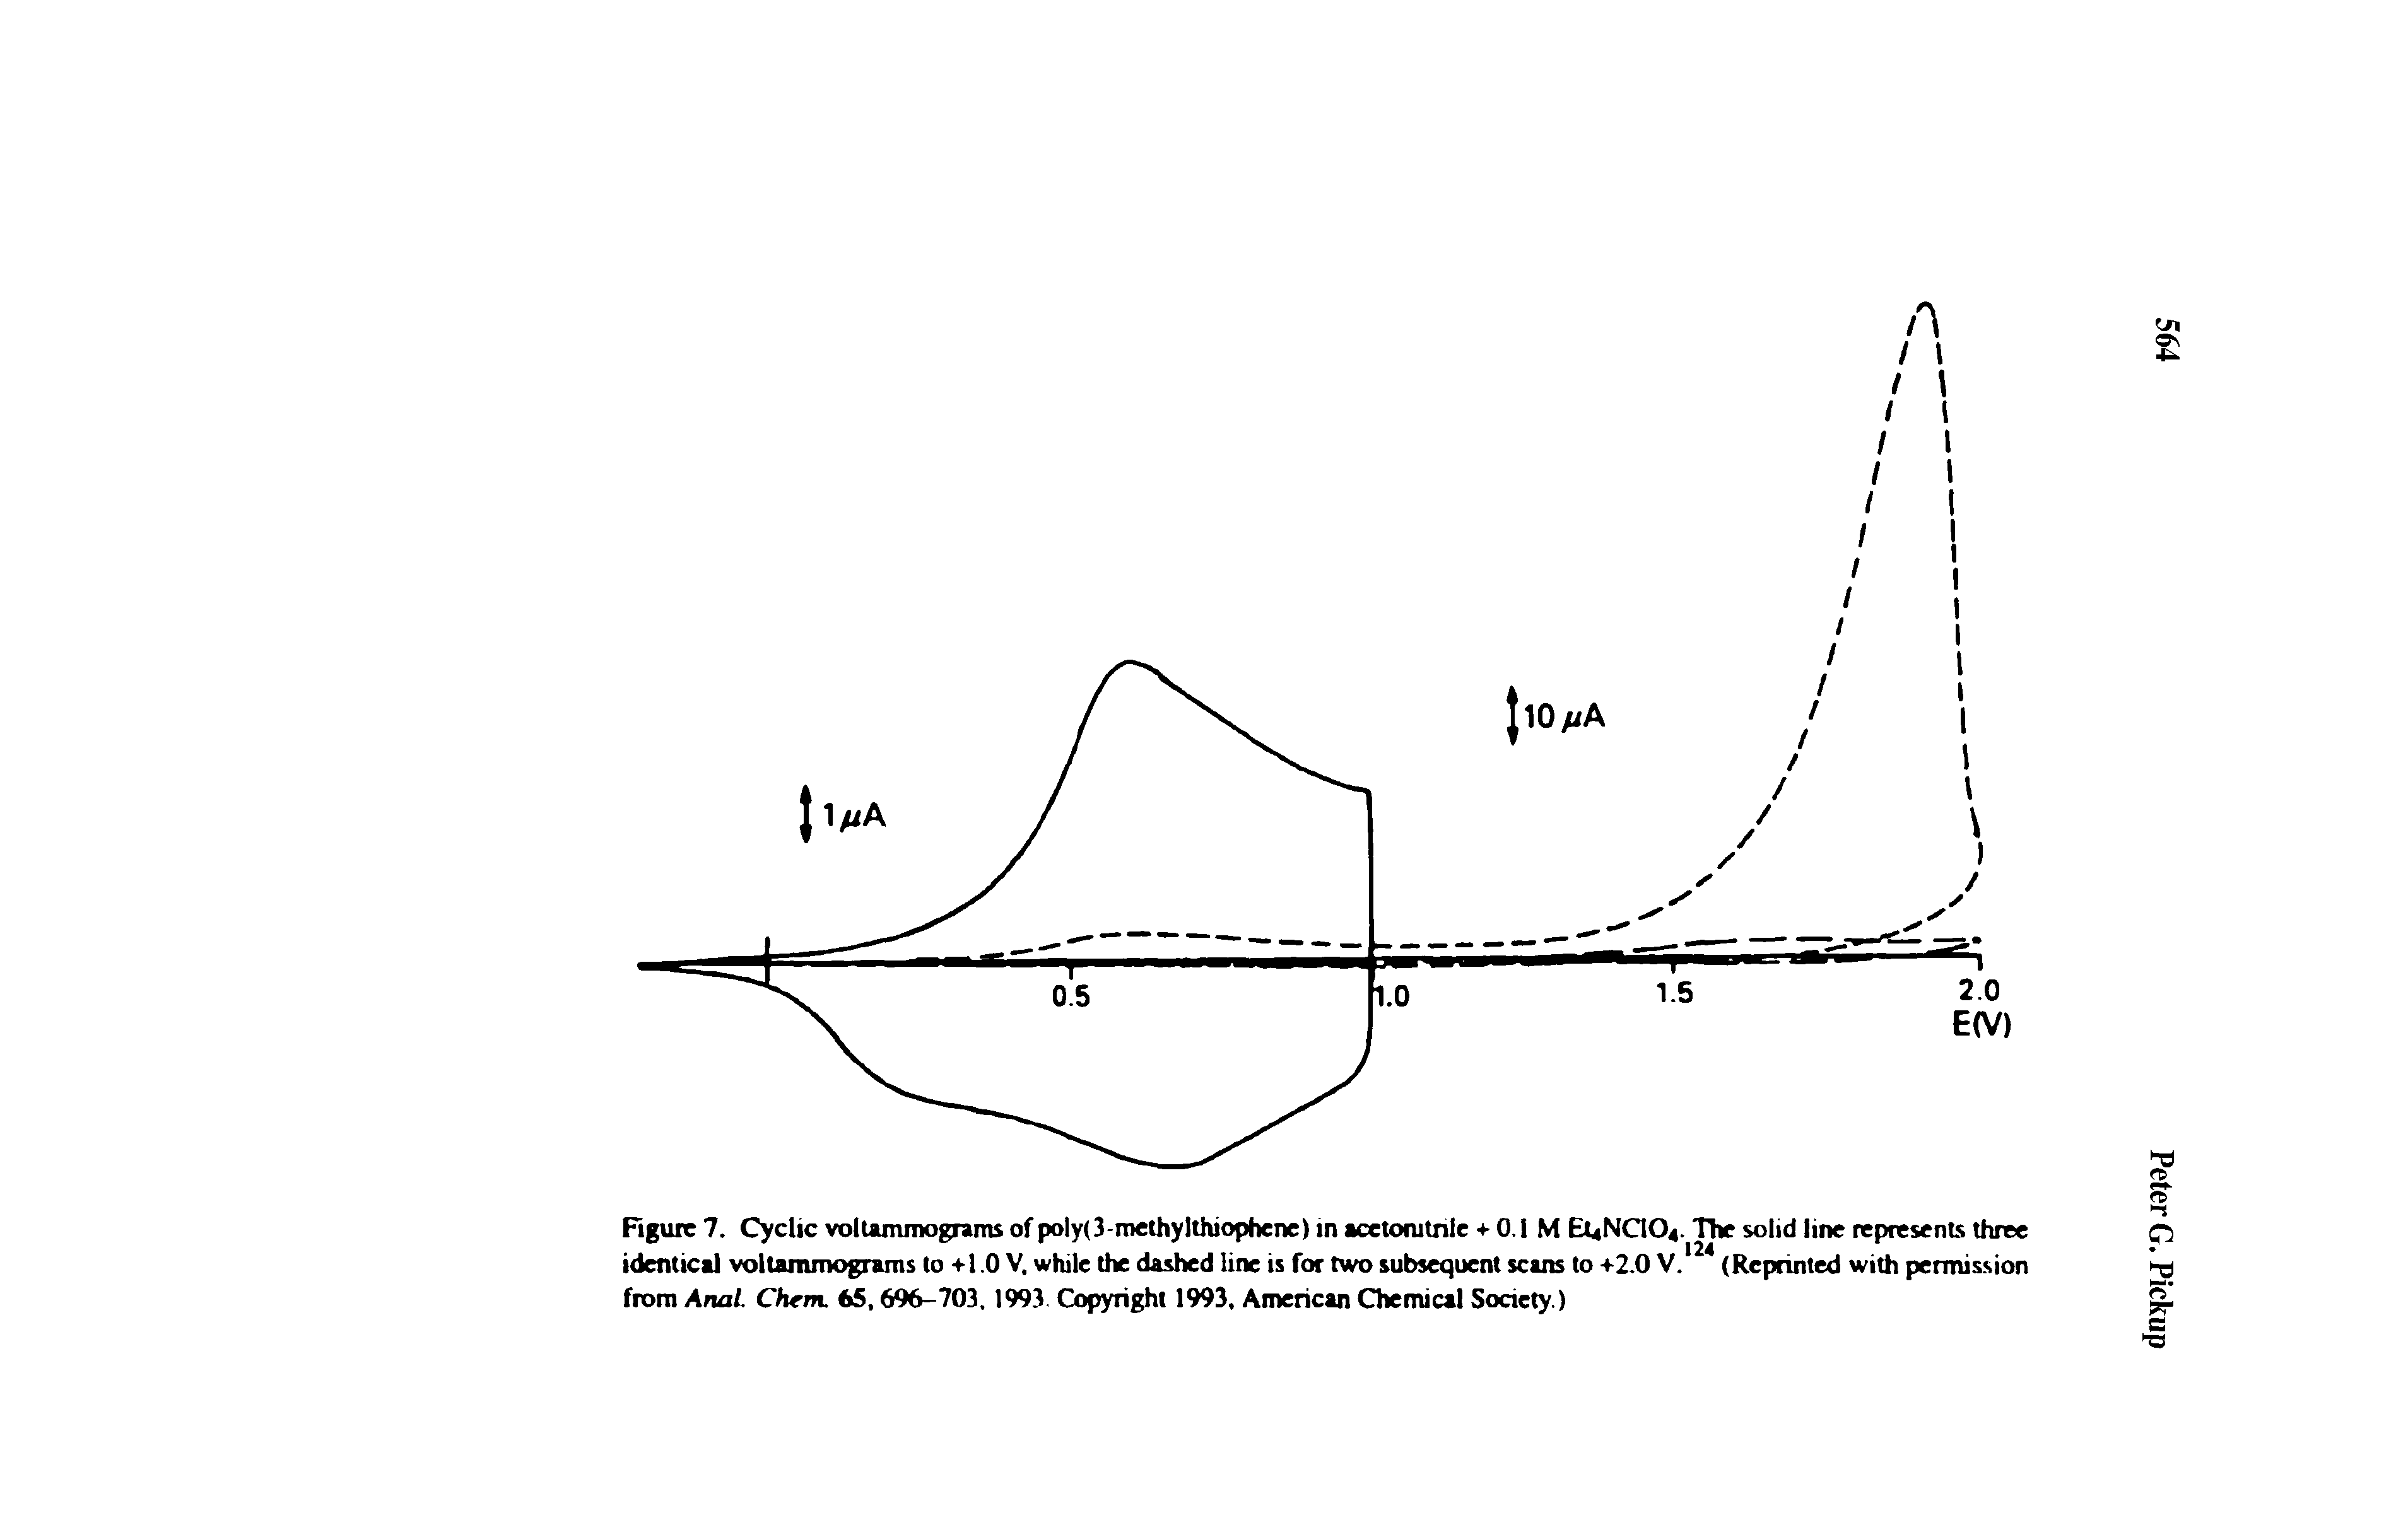 Figure 7. Cyclic voltammograms of poly(3-methylthiophene) in acetonitrile + 0.1 M E NCICV The solid line represents three identical voltammograms to +1.0 V. while the dashed line is for two subsequent scans to +2.0 V.1 (Reprinted with permission from Anal Chem. 65,696-703.1993. Copyright 1993, American Chemical Society.)...